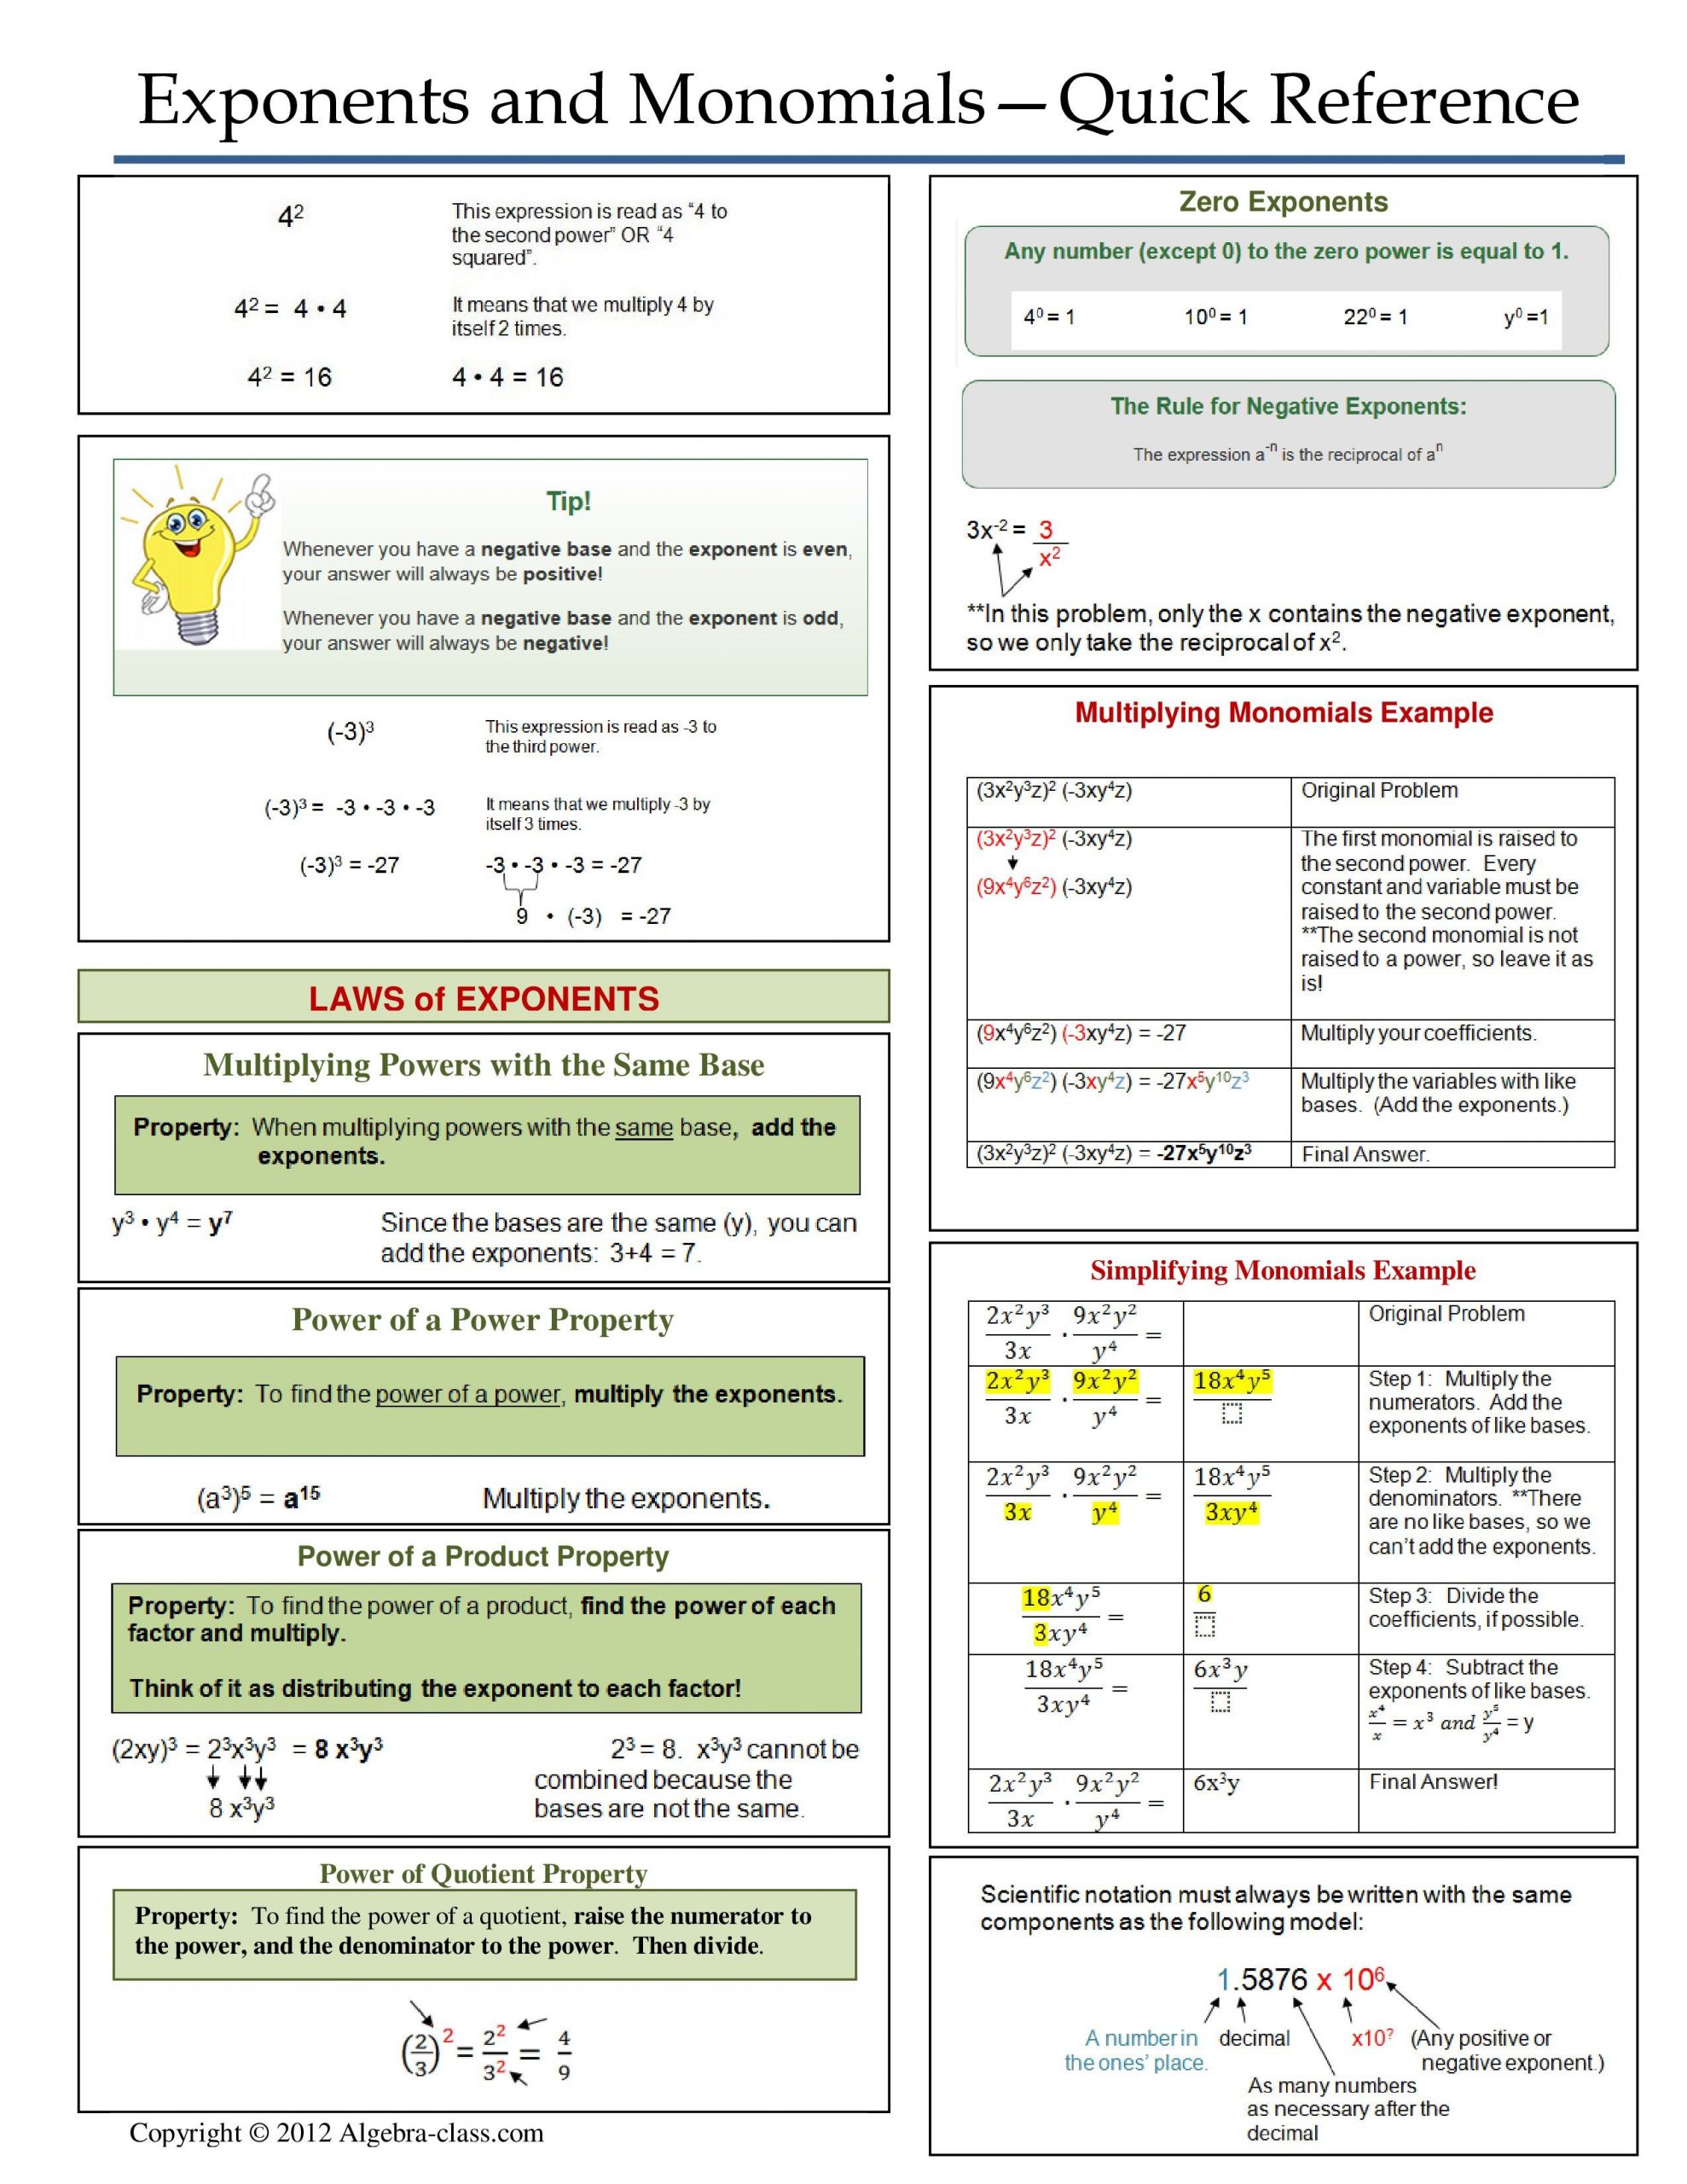 Multiplying Monomials Worksheet Answers Monomial Worksheets with Answers